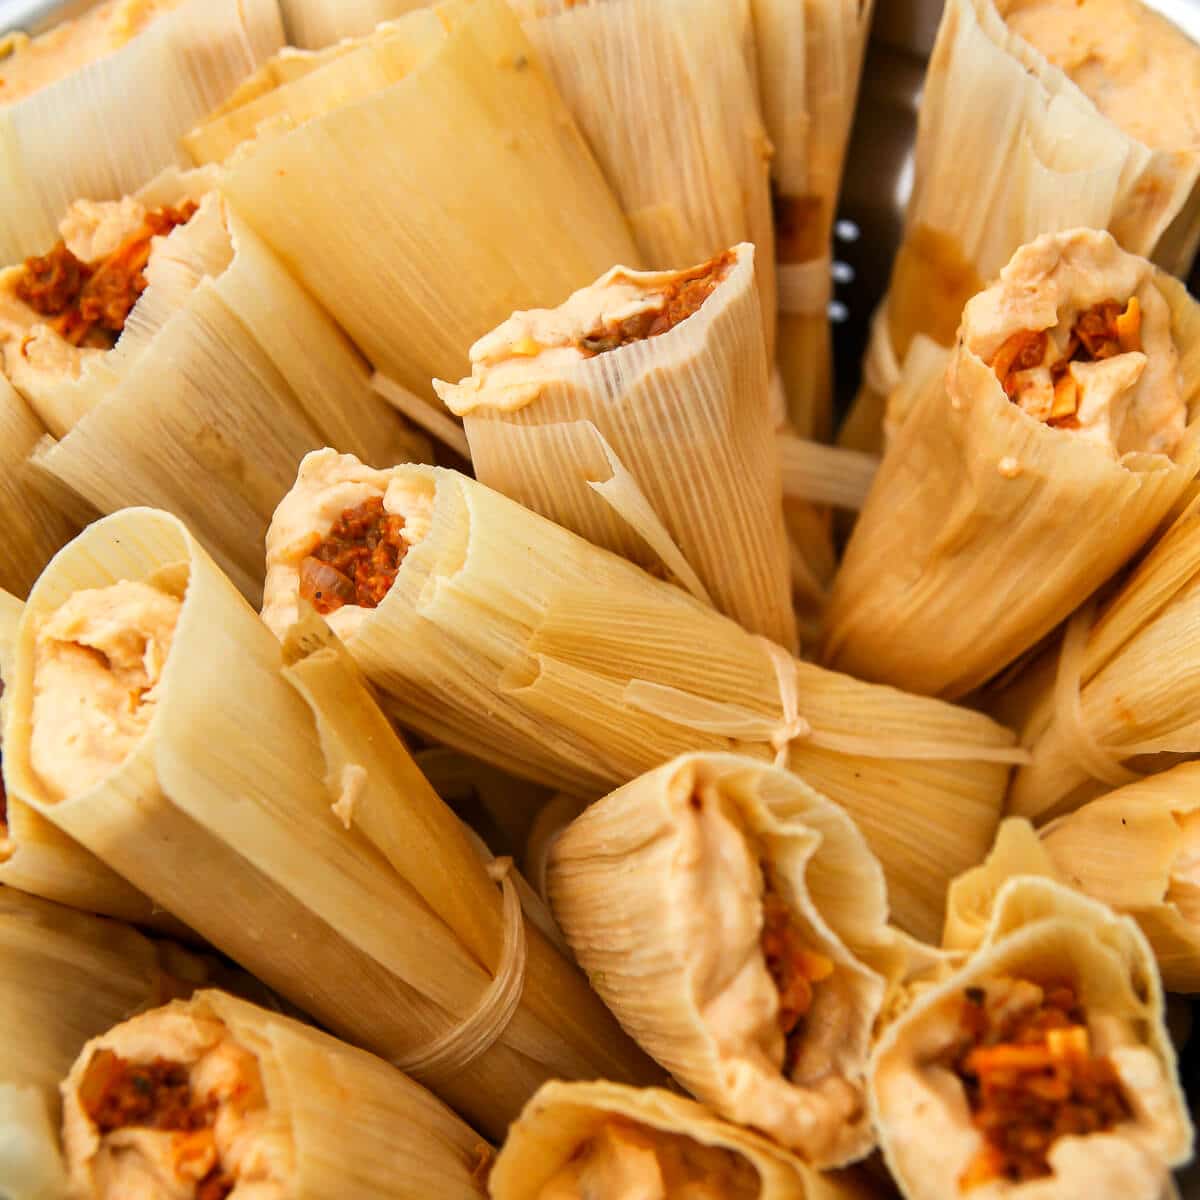 Easy Homemade Tamales Recipe - Hot tamales you can make at home